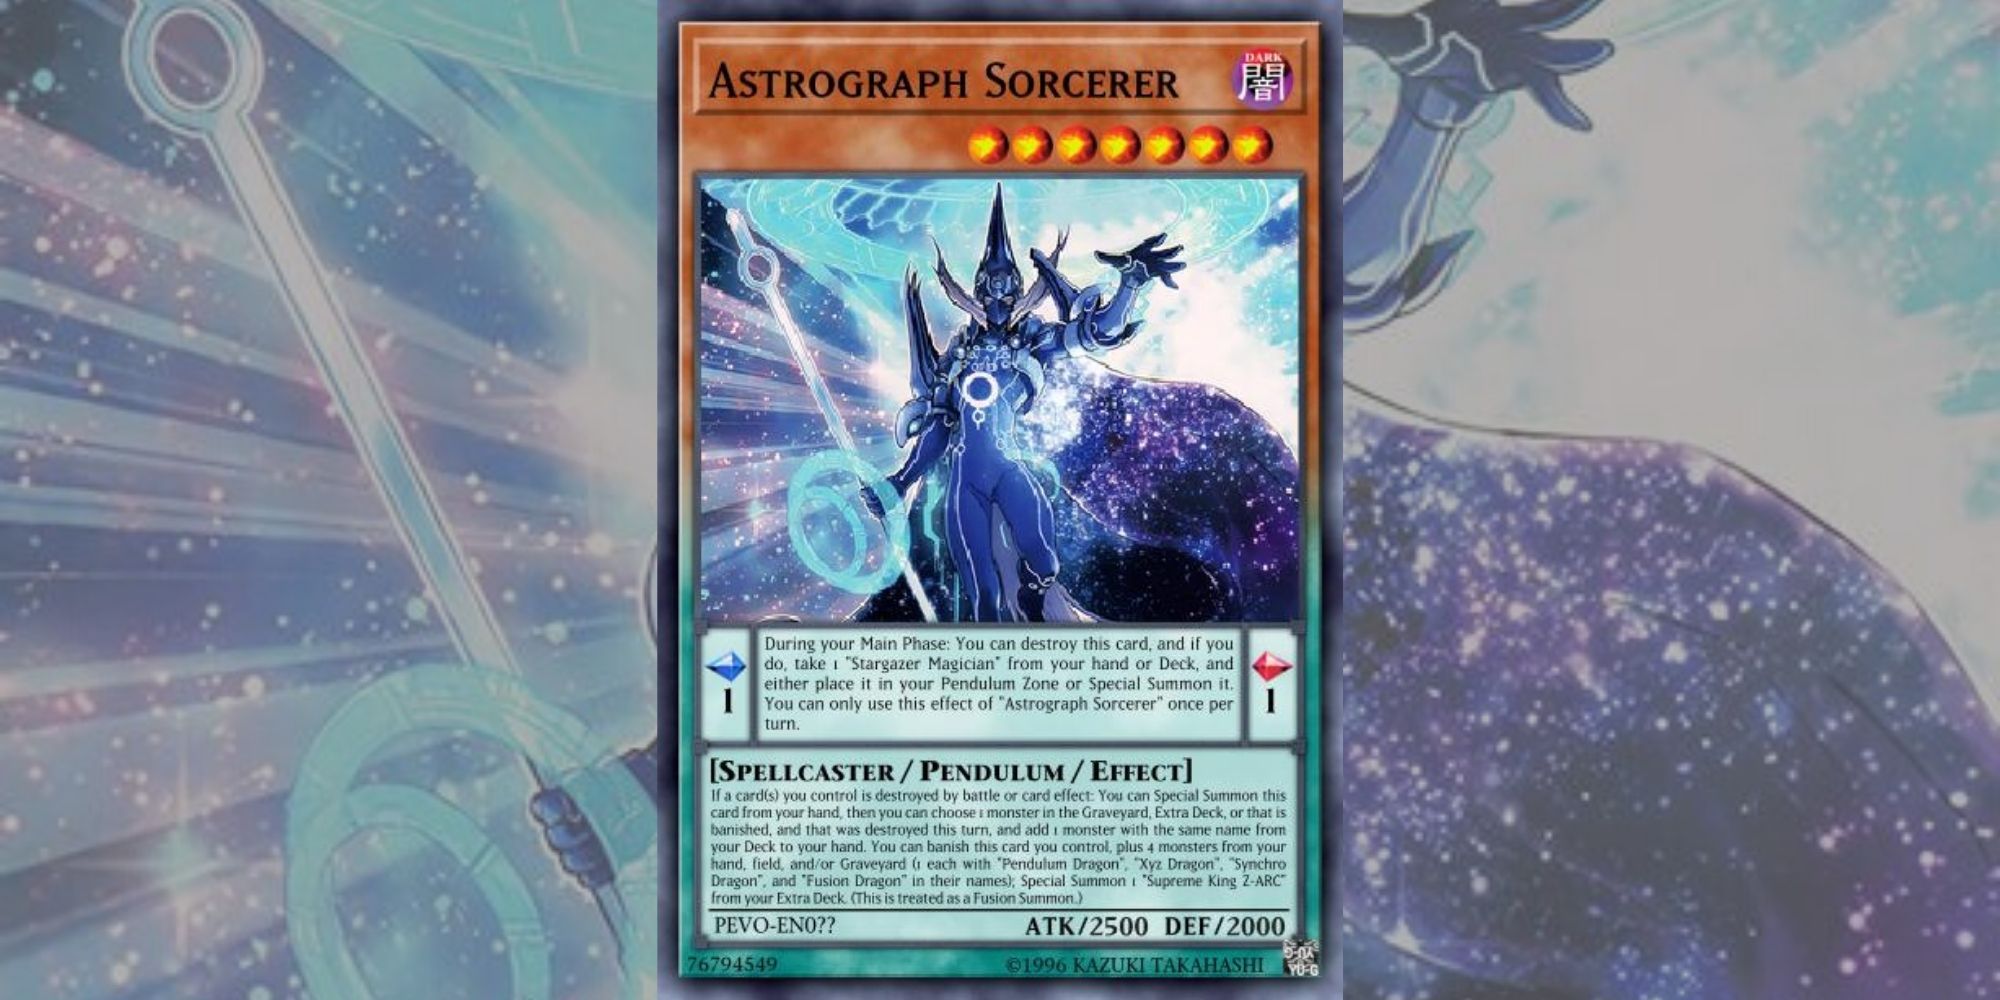 Yu-Gi-Oh! Card Astrograph Sorcerer against background made from card art.